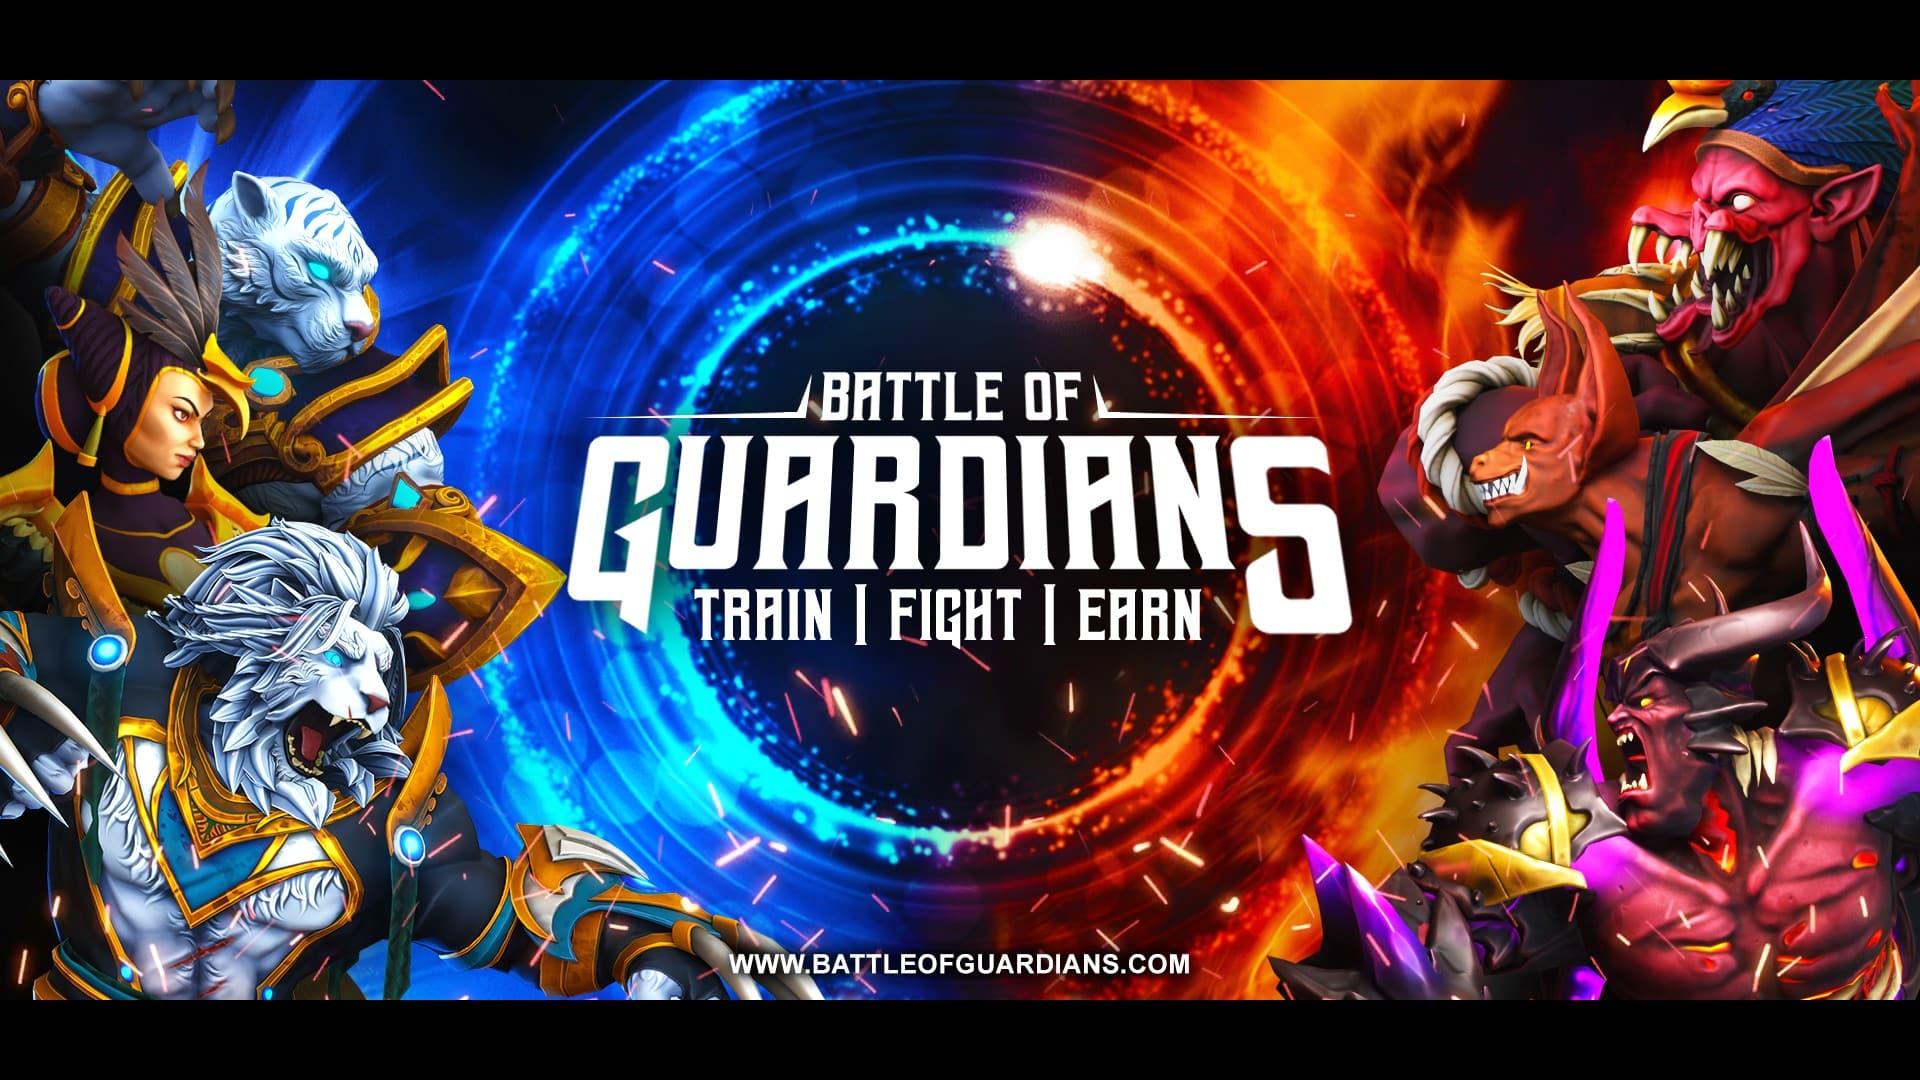 "Battle of Guardians": A PvP Fighting Blockchain NFT Game